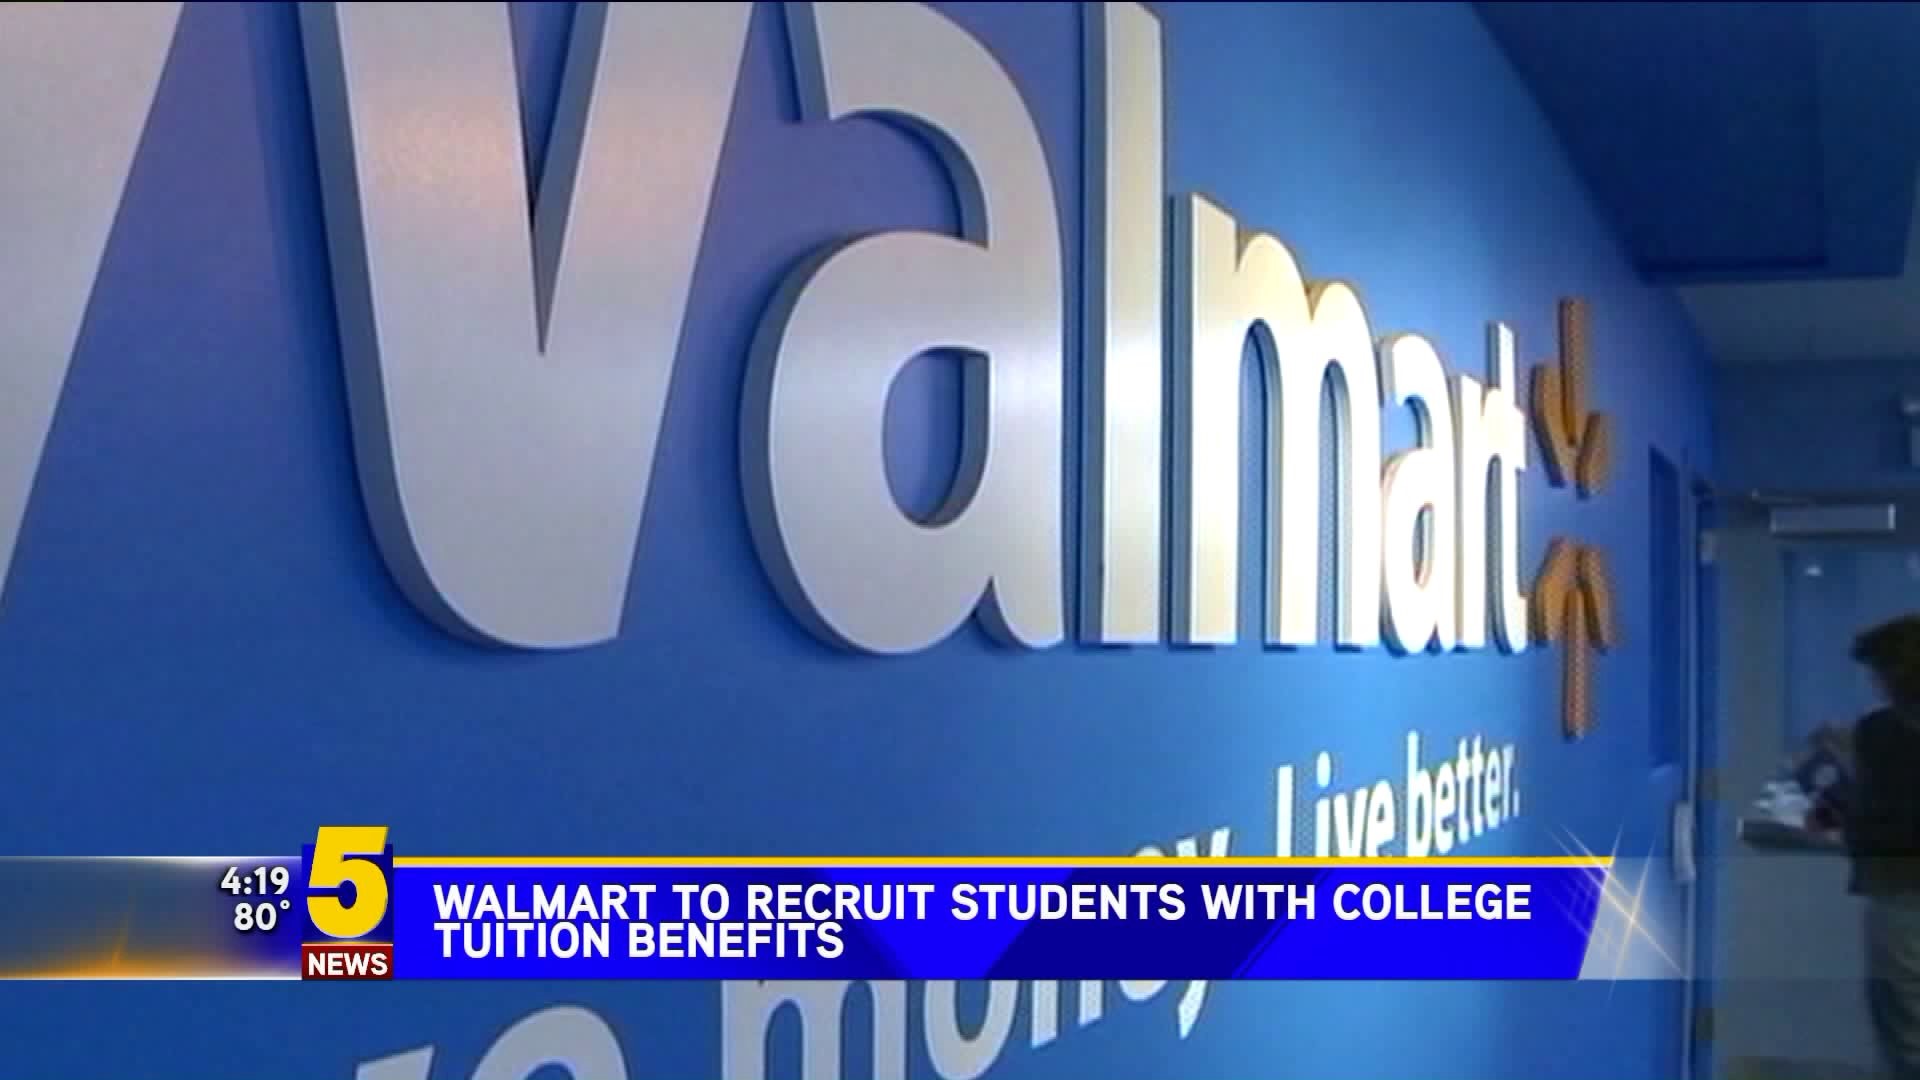 Walmart to Recruit Students With College Tuition Benefits